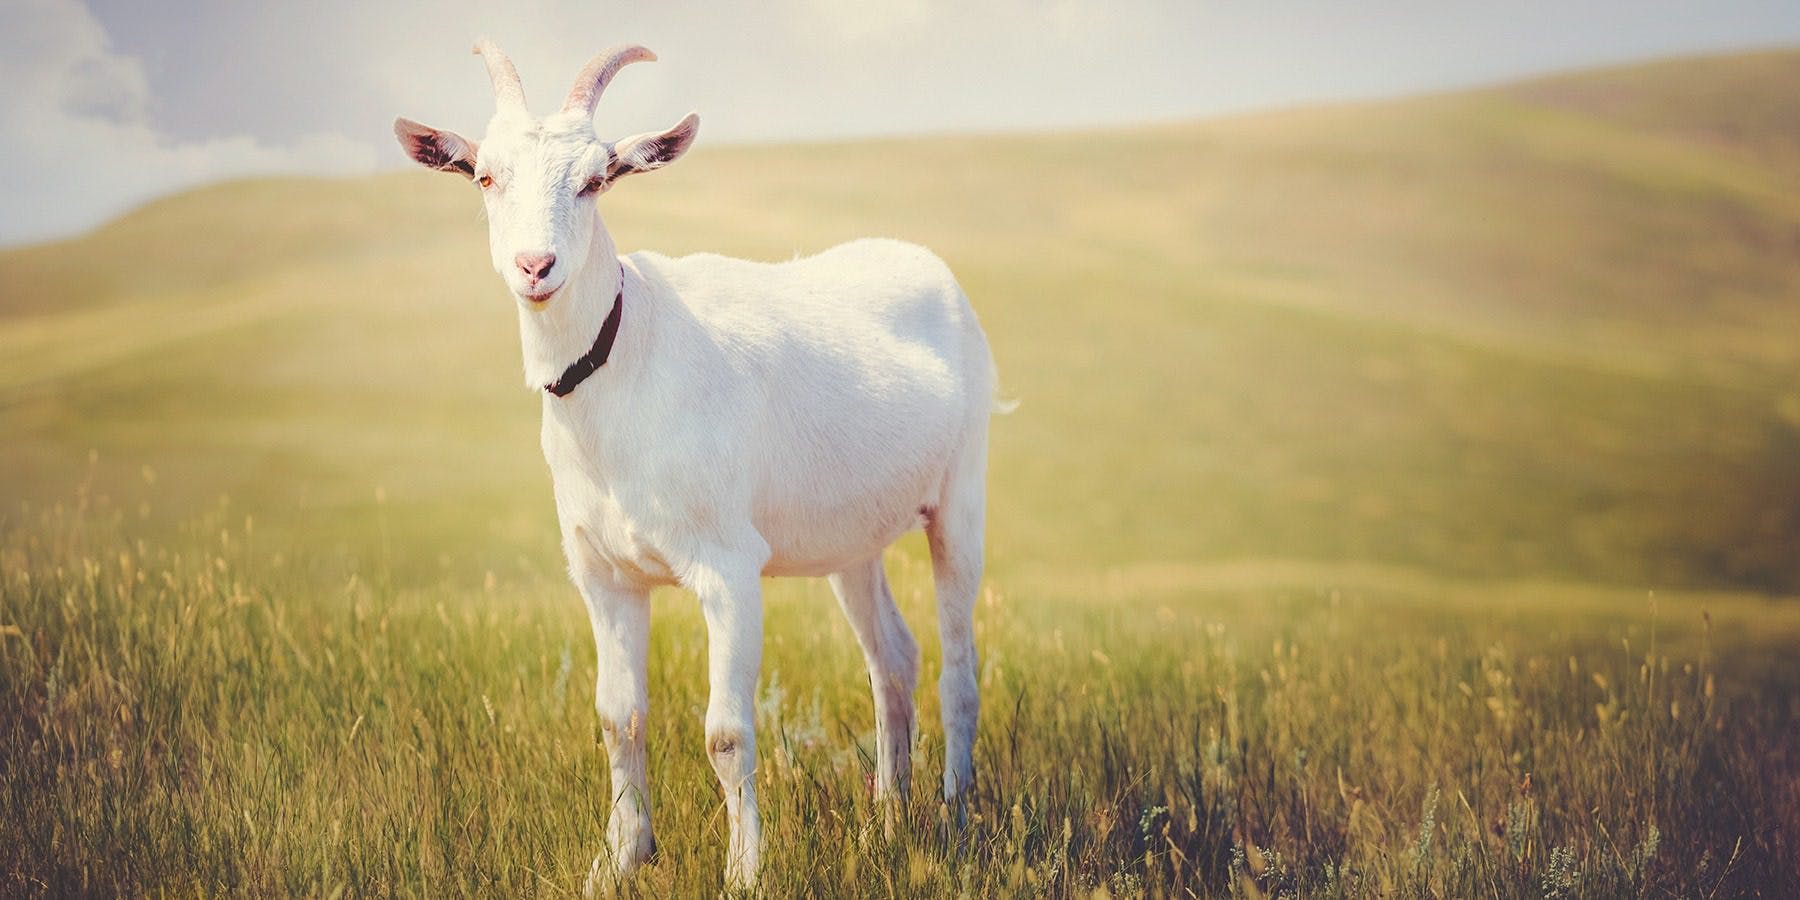 A goat in a sunny field